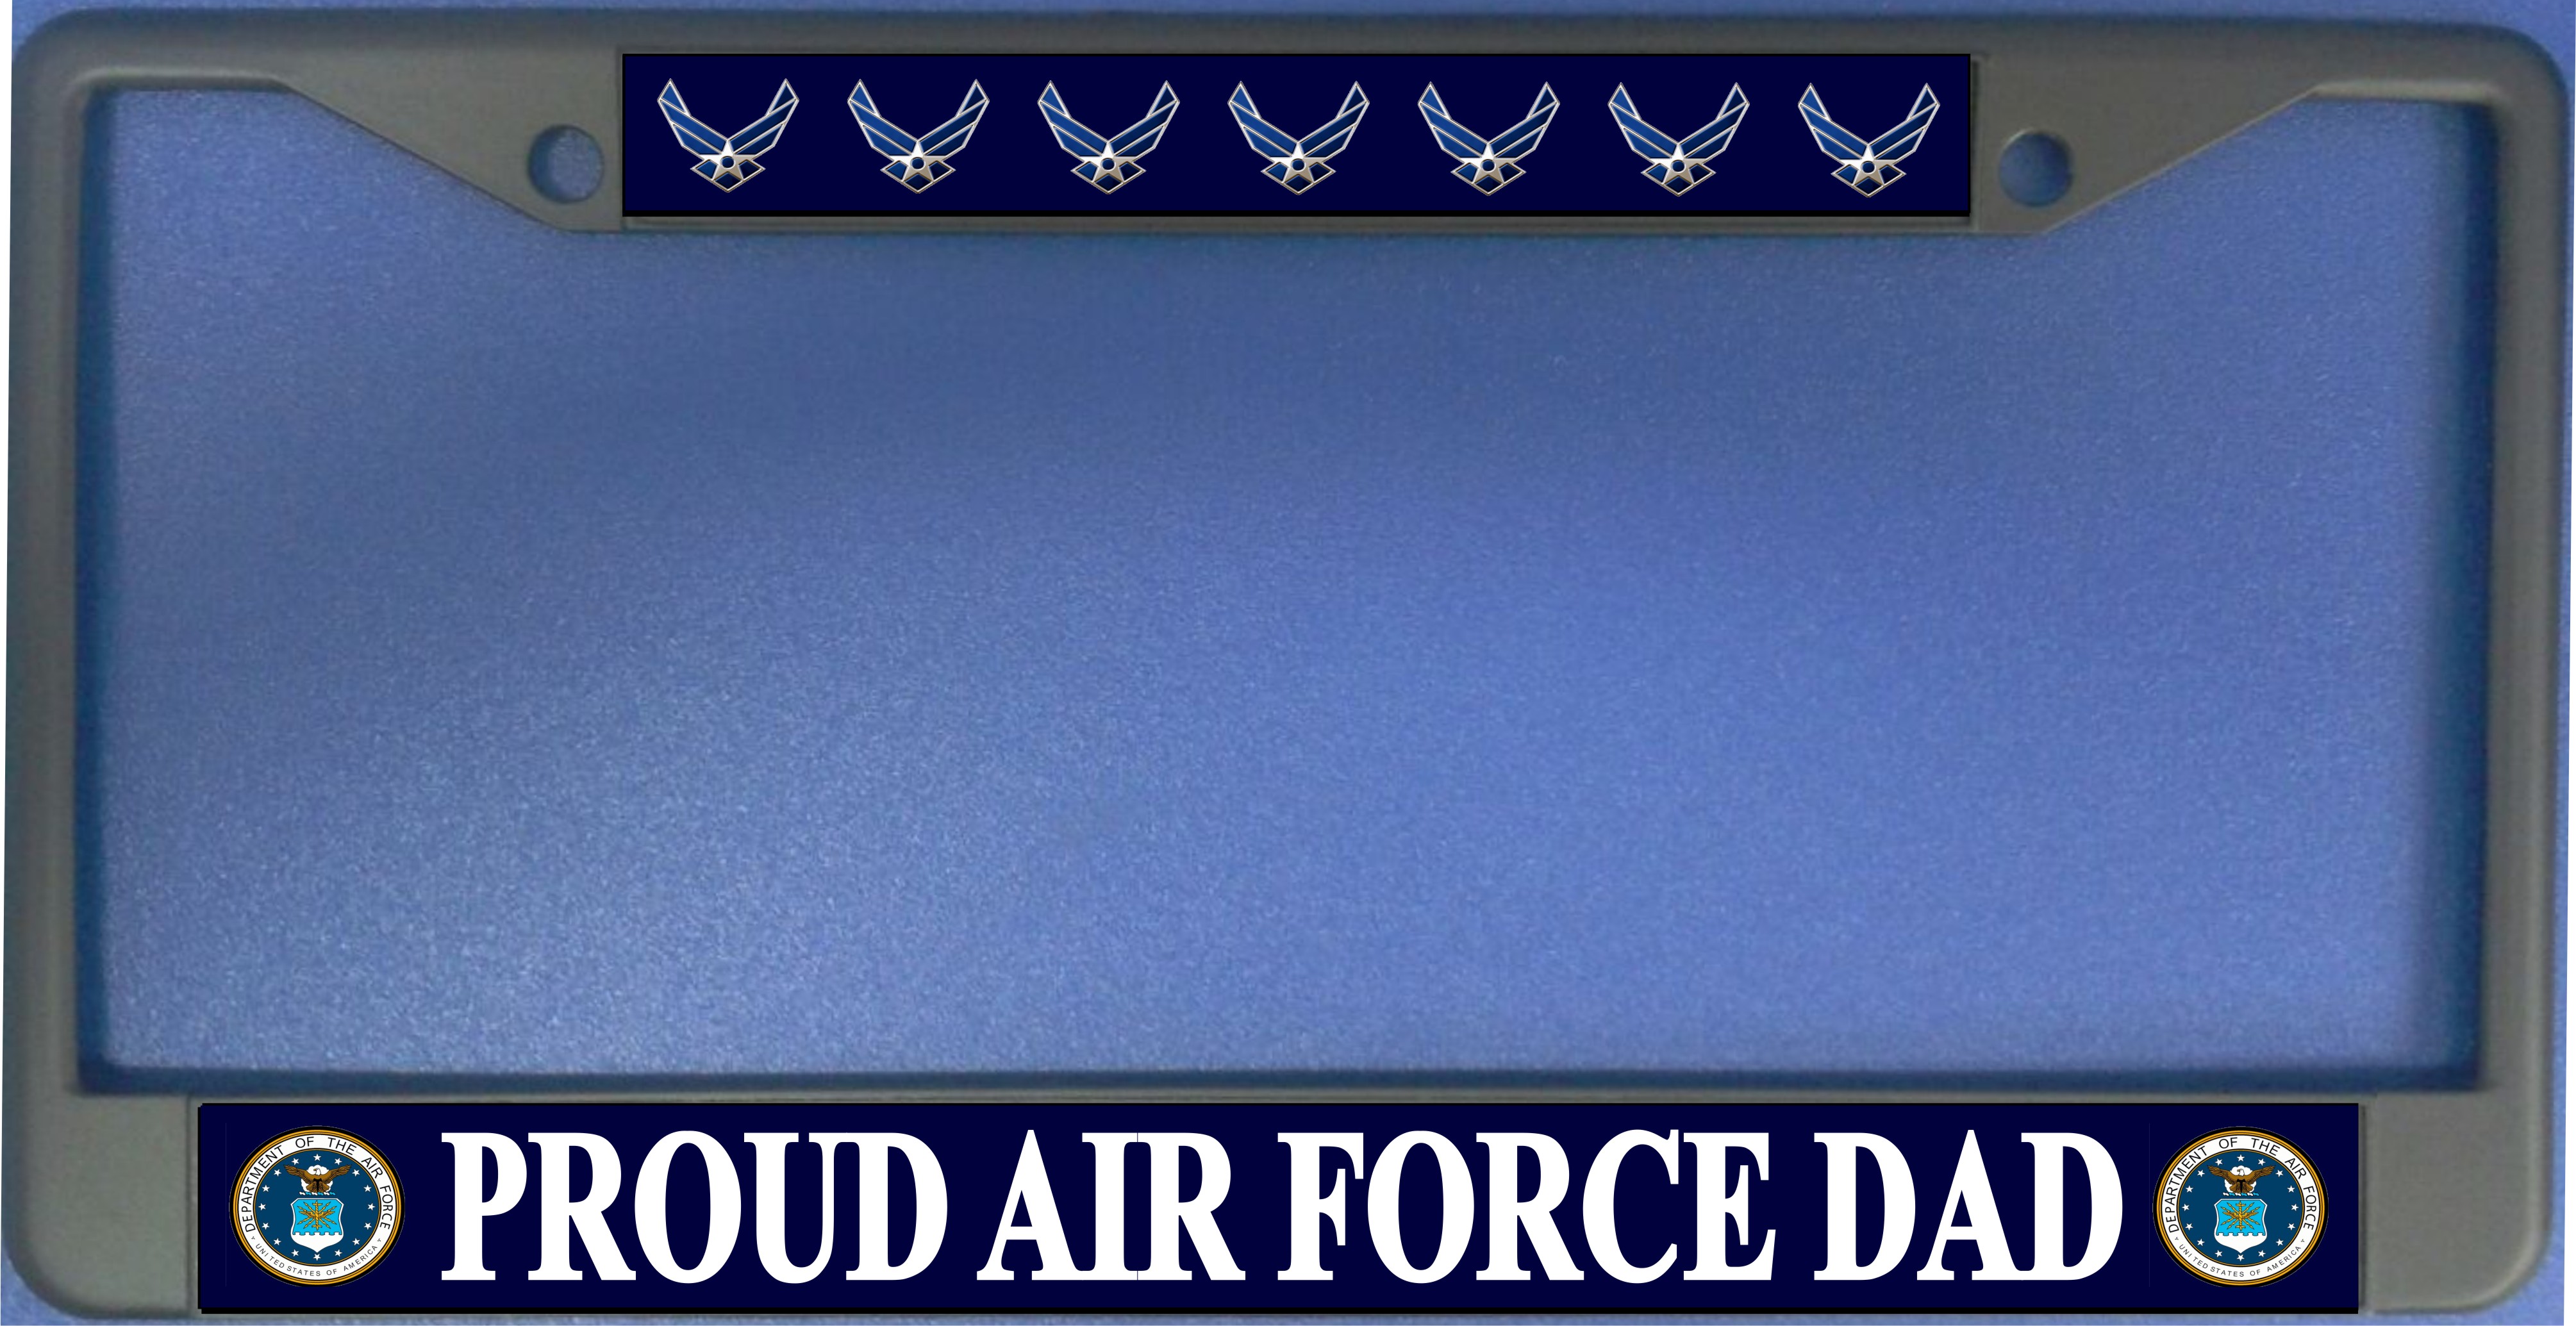 Proud Air Force Dad Photo License Plate Frame  Free SCREW Caps with this Frame